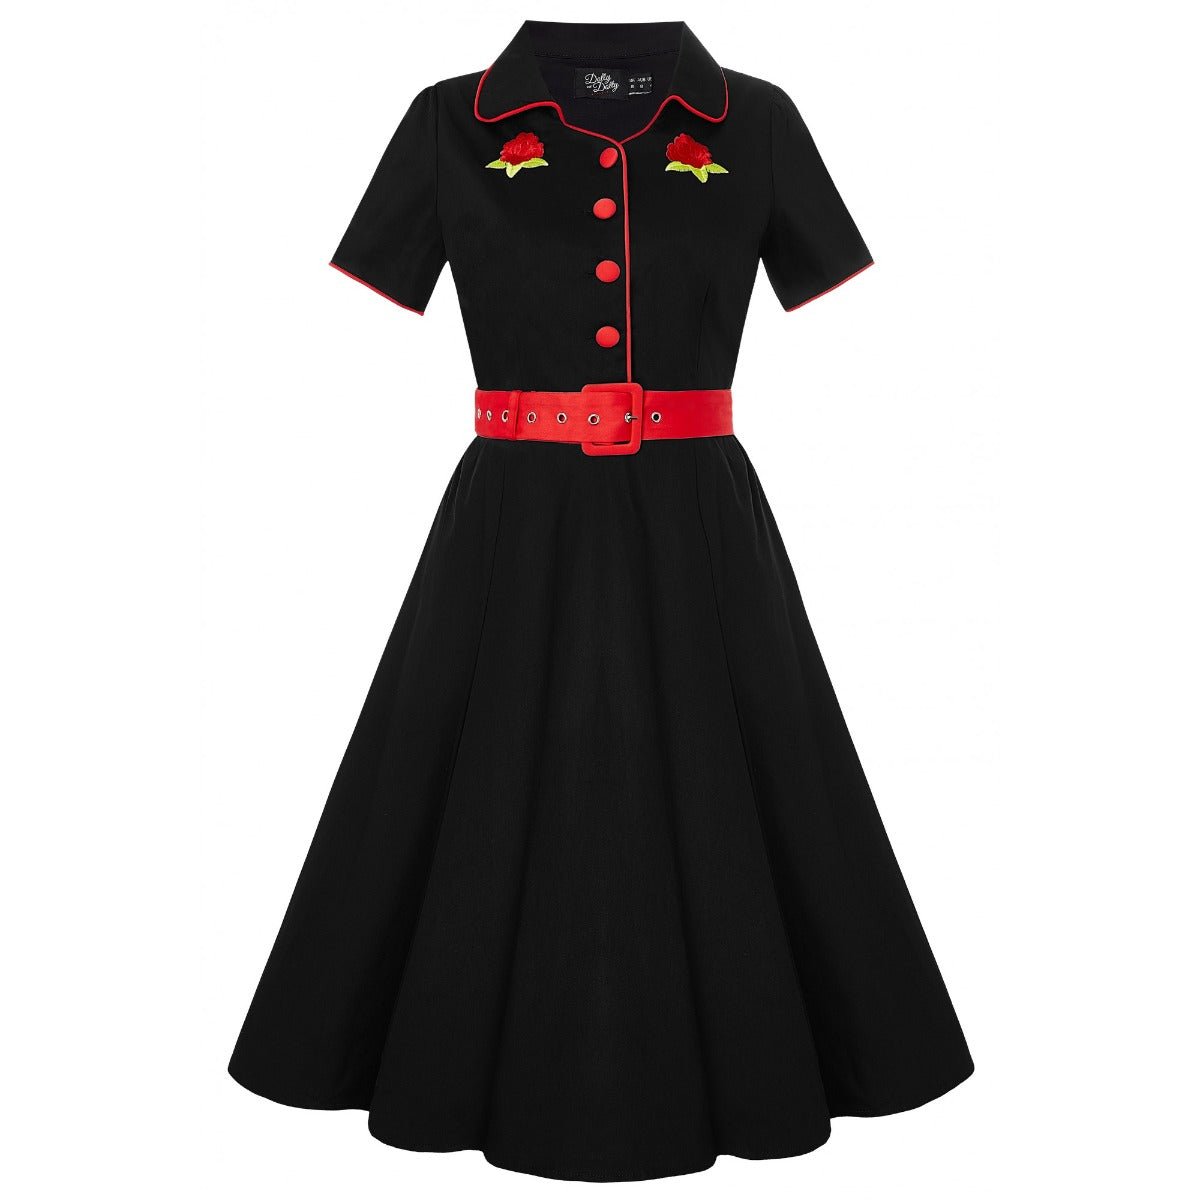 Short sleeved Sherry diner dress in black, with red buttons, belt and roses, front view